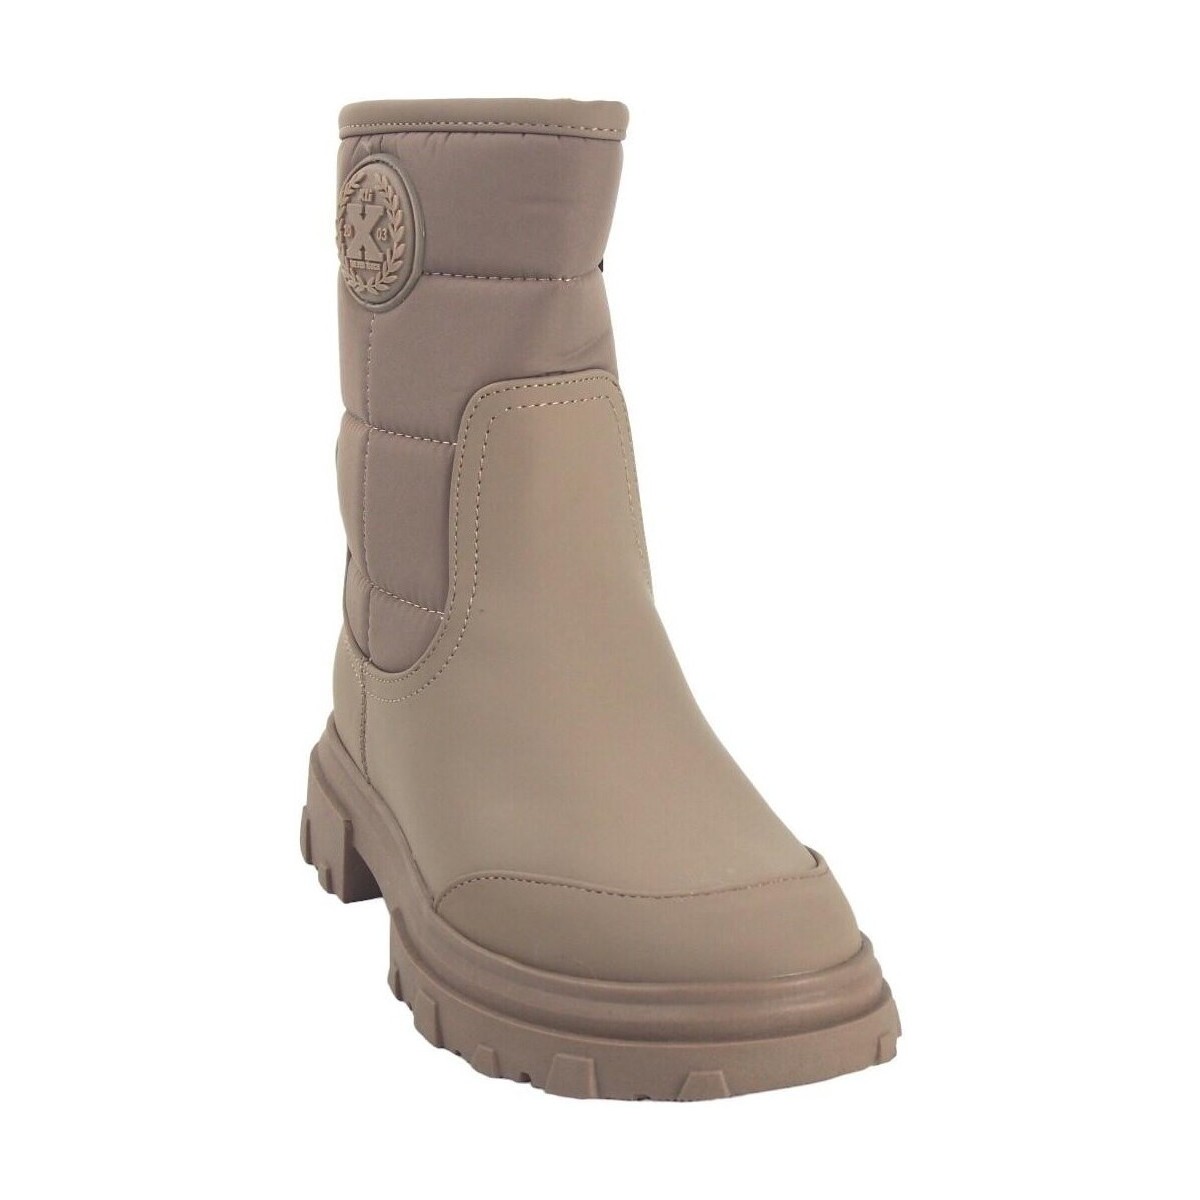 Xti Marron Bottines fille 150118 taupe g1HlRY5v